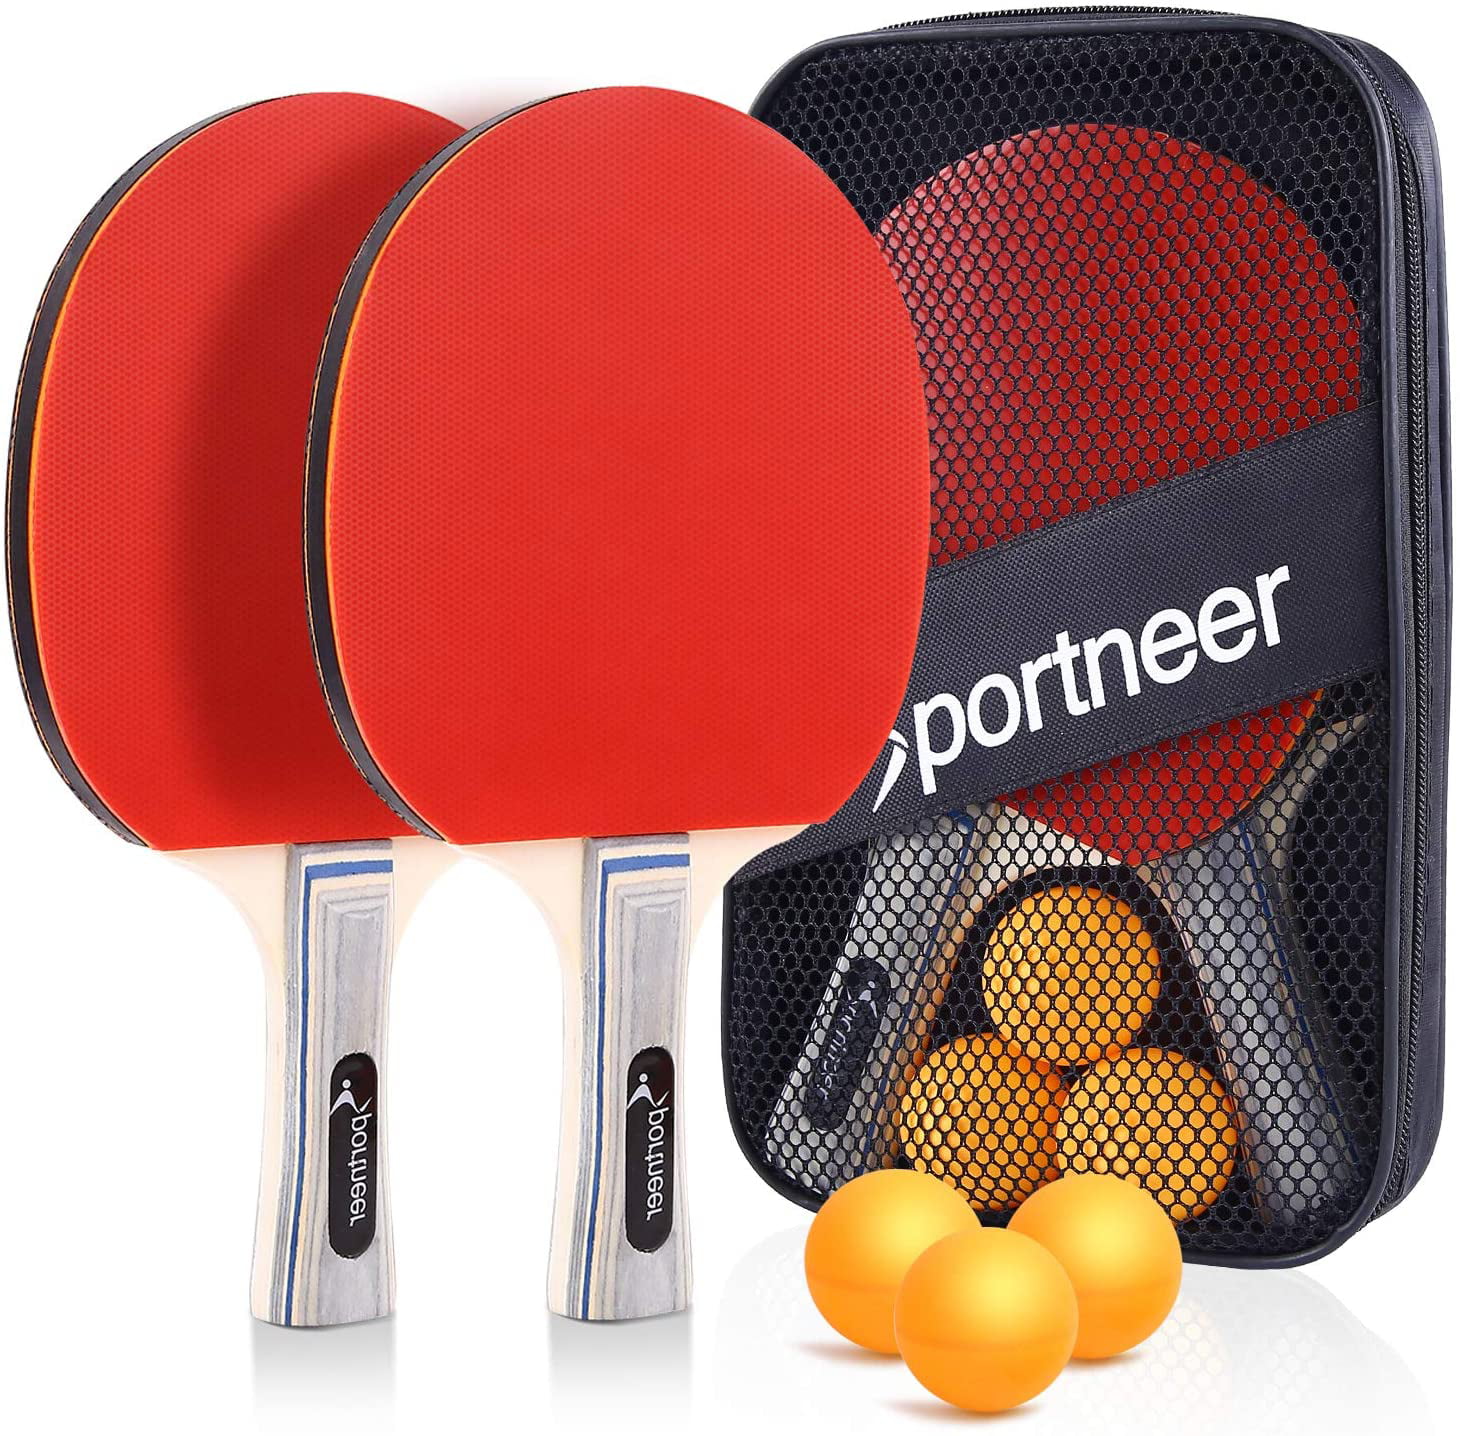 Waterproof Ping Pong Paddle Case Table Tennis Racket Bag Cover Comfortable Handle Storage Case for 2 Ping Pong Rackets and Balls 